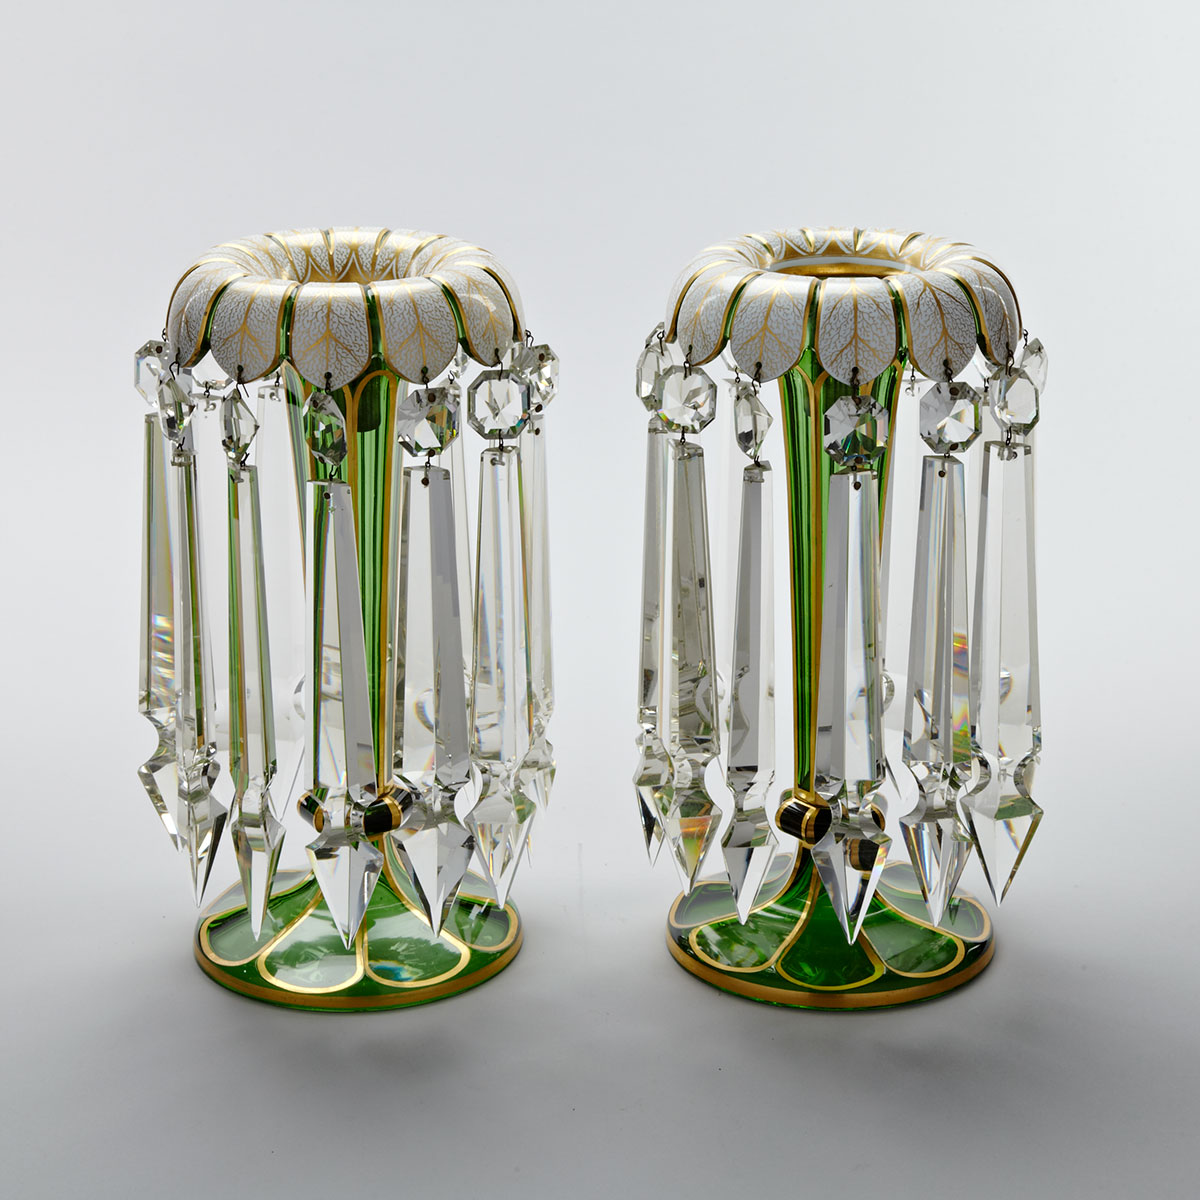 Pair of English Overlaid and Gilt Green Glass Lustres, third quarter of the 19th century